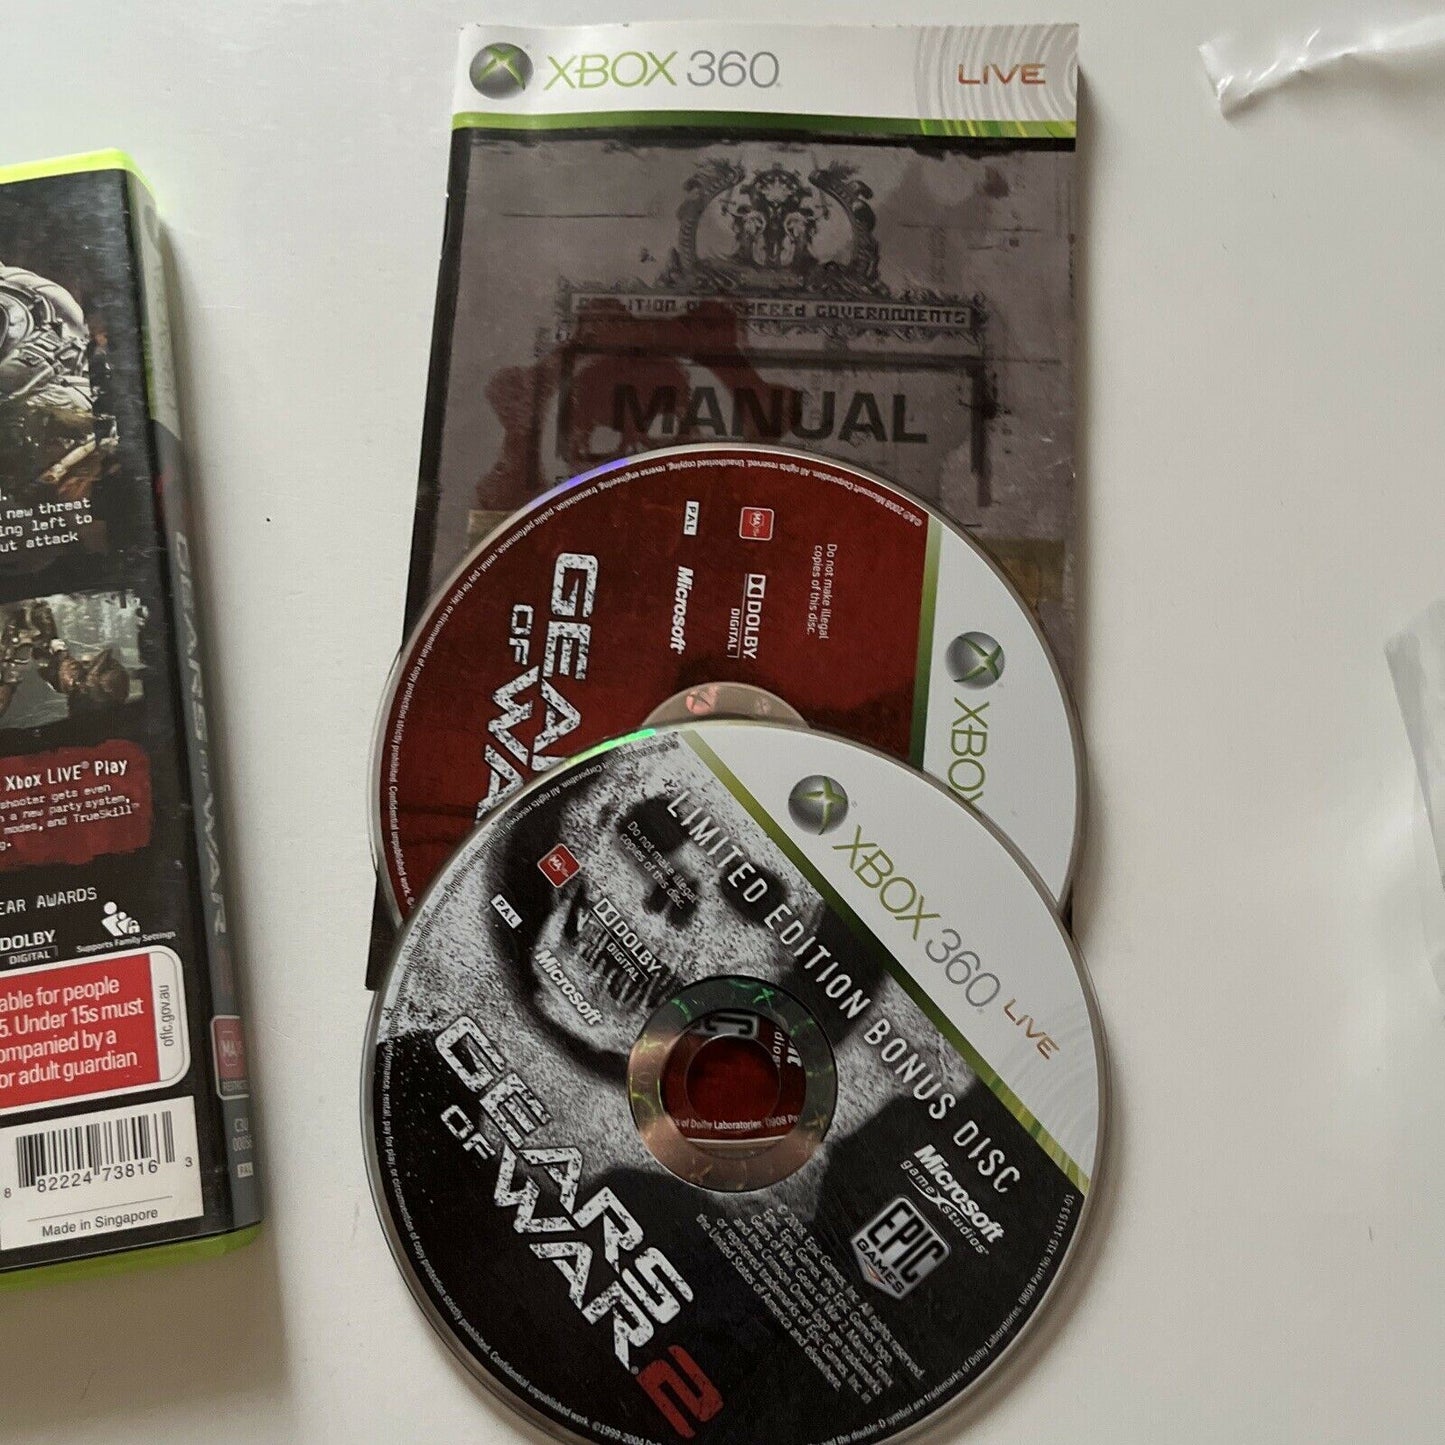 Gears of War 2 With Limited Edition Bonus Disc Microsoft Xbox 360 PAL Manual